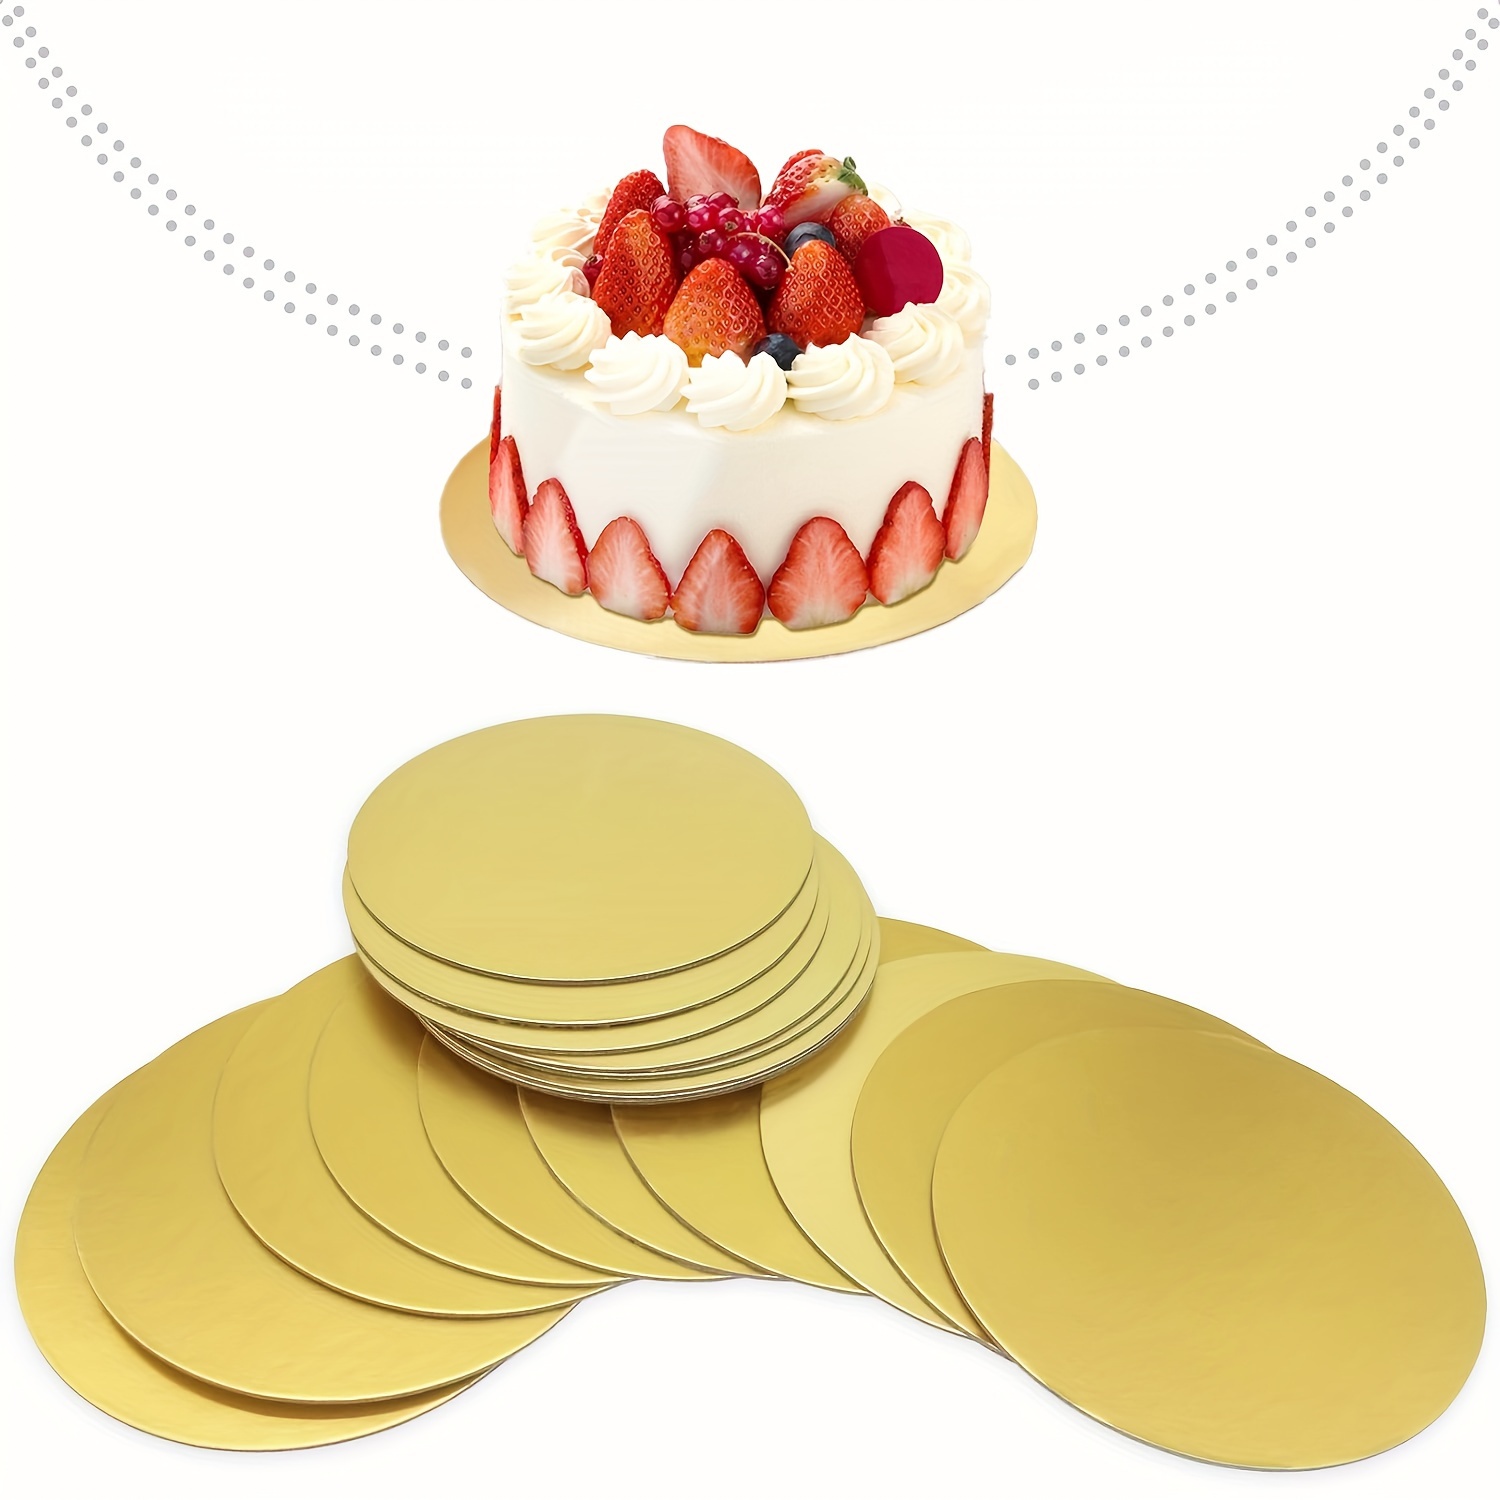 

10pcs, Golden Cake Boards, Round Cake Board, Disposable Cake Board Base, Grease Proof Food Grade Cake Plate, For New Year Wedding Birthday Party, Cake, Dessert, Cake, Pizza Decorating And Exhibition